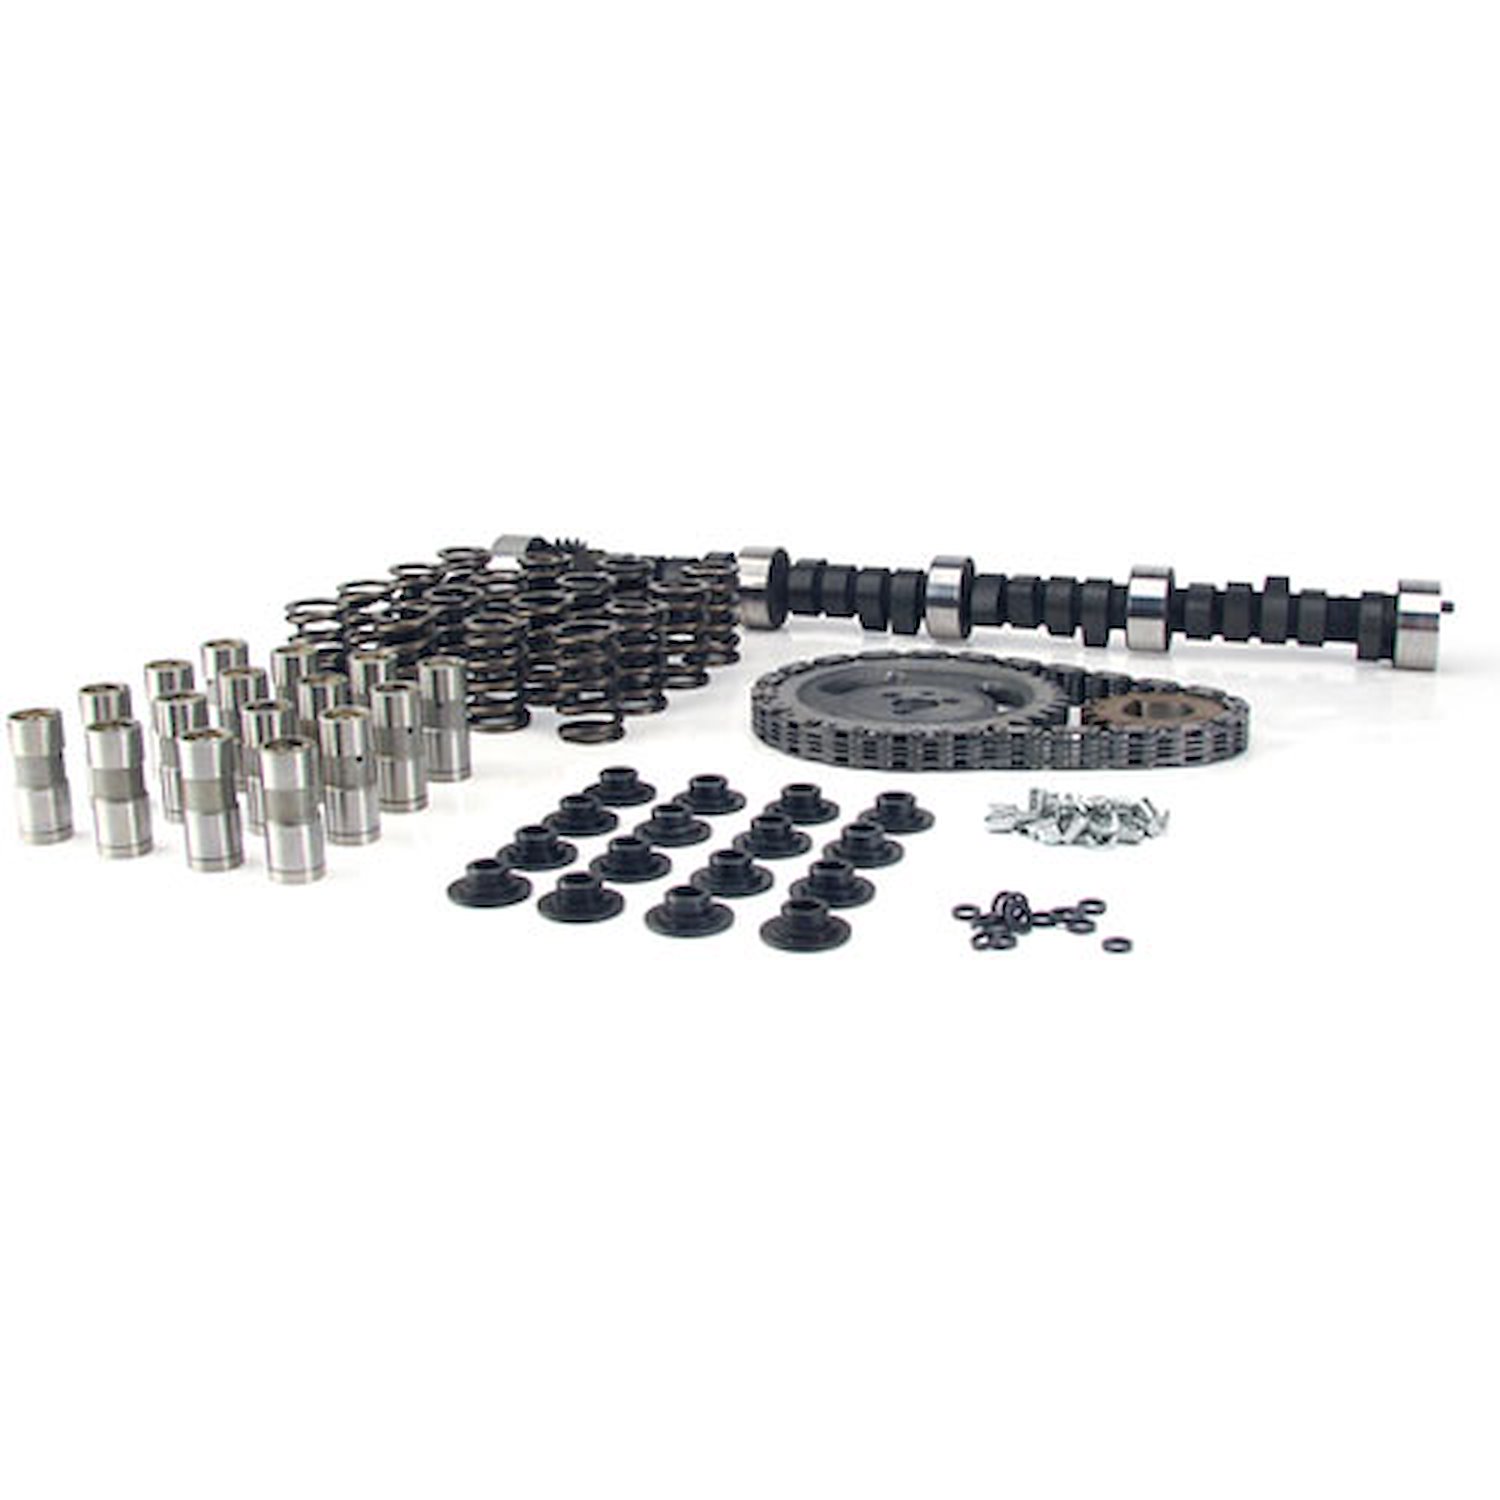 Xtreme Energy 284H Hydraulic Flat Tappet Camshaft Complete Kit Lift: .574"/.578" Duration: 284°/296° RPM Range: 2300-6500